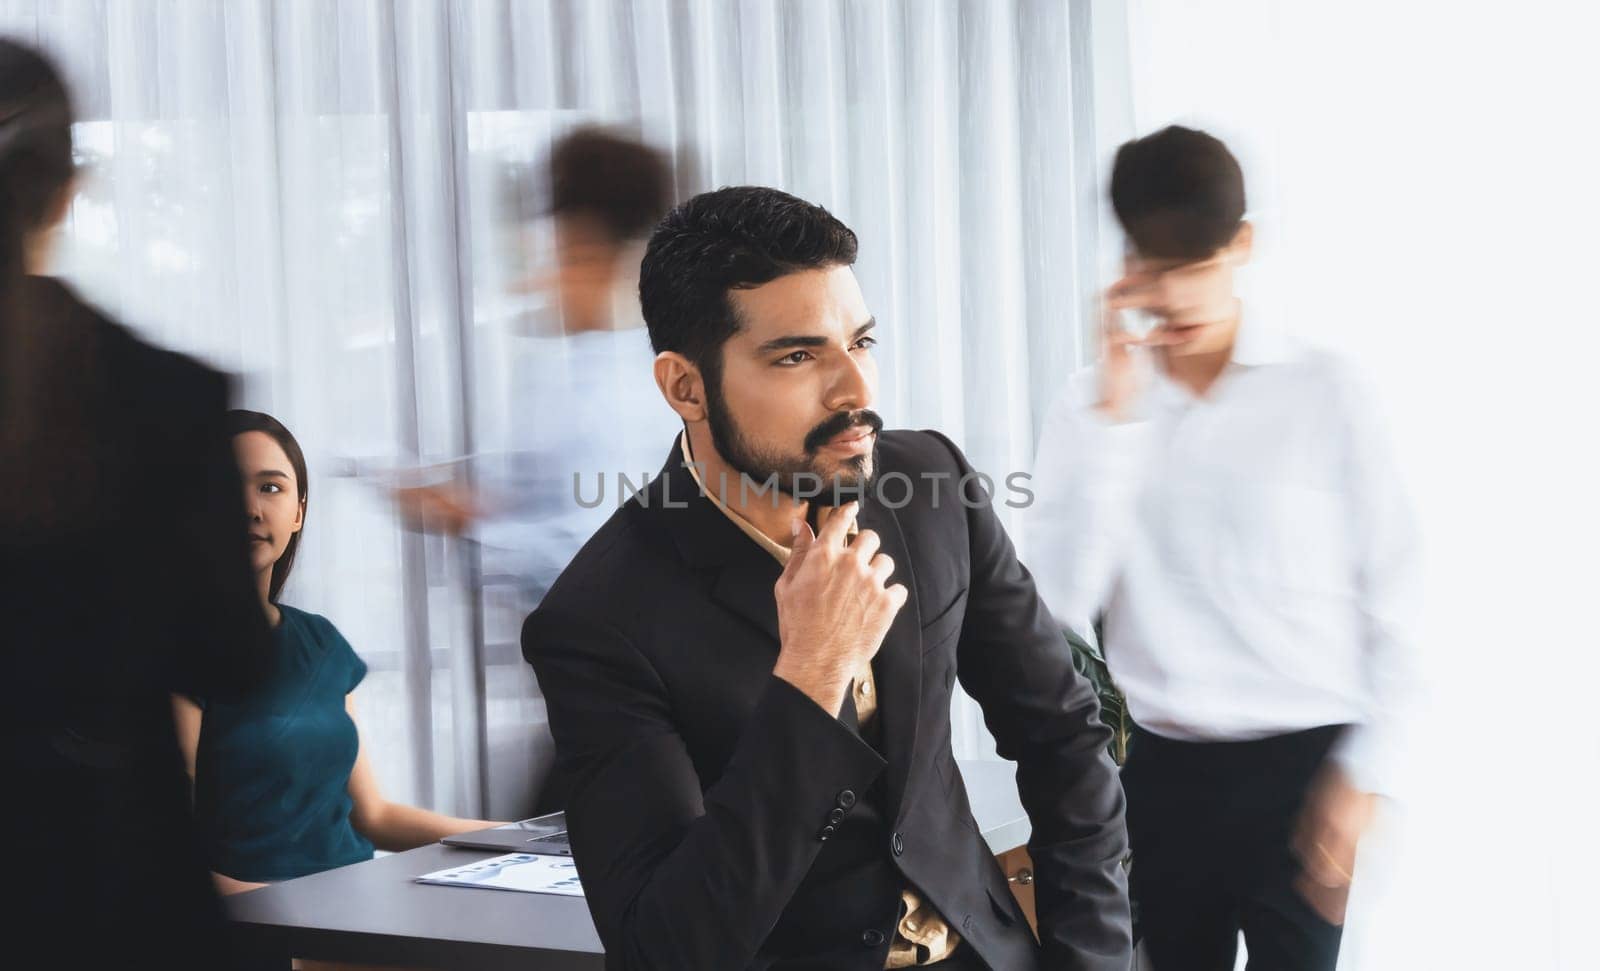 Businessman portrait poses confidently with diverse coworkers in busy meeting room in motion blurred background. Multicultural team works together for business success. Concord